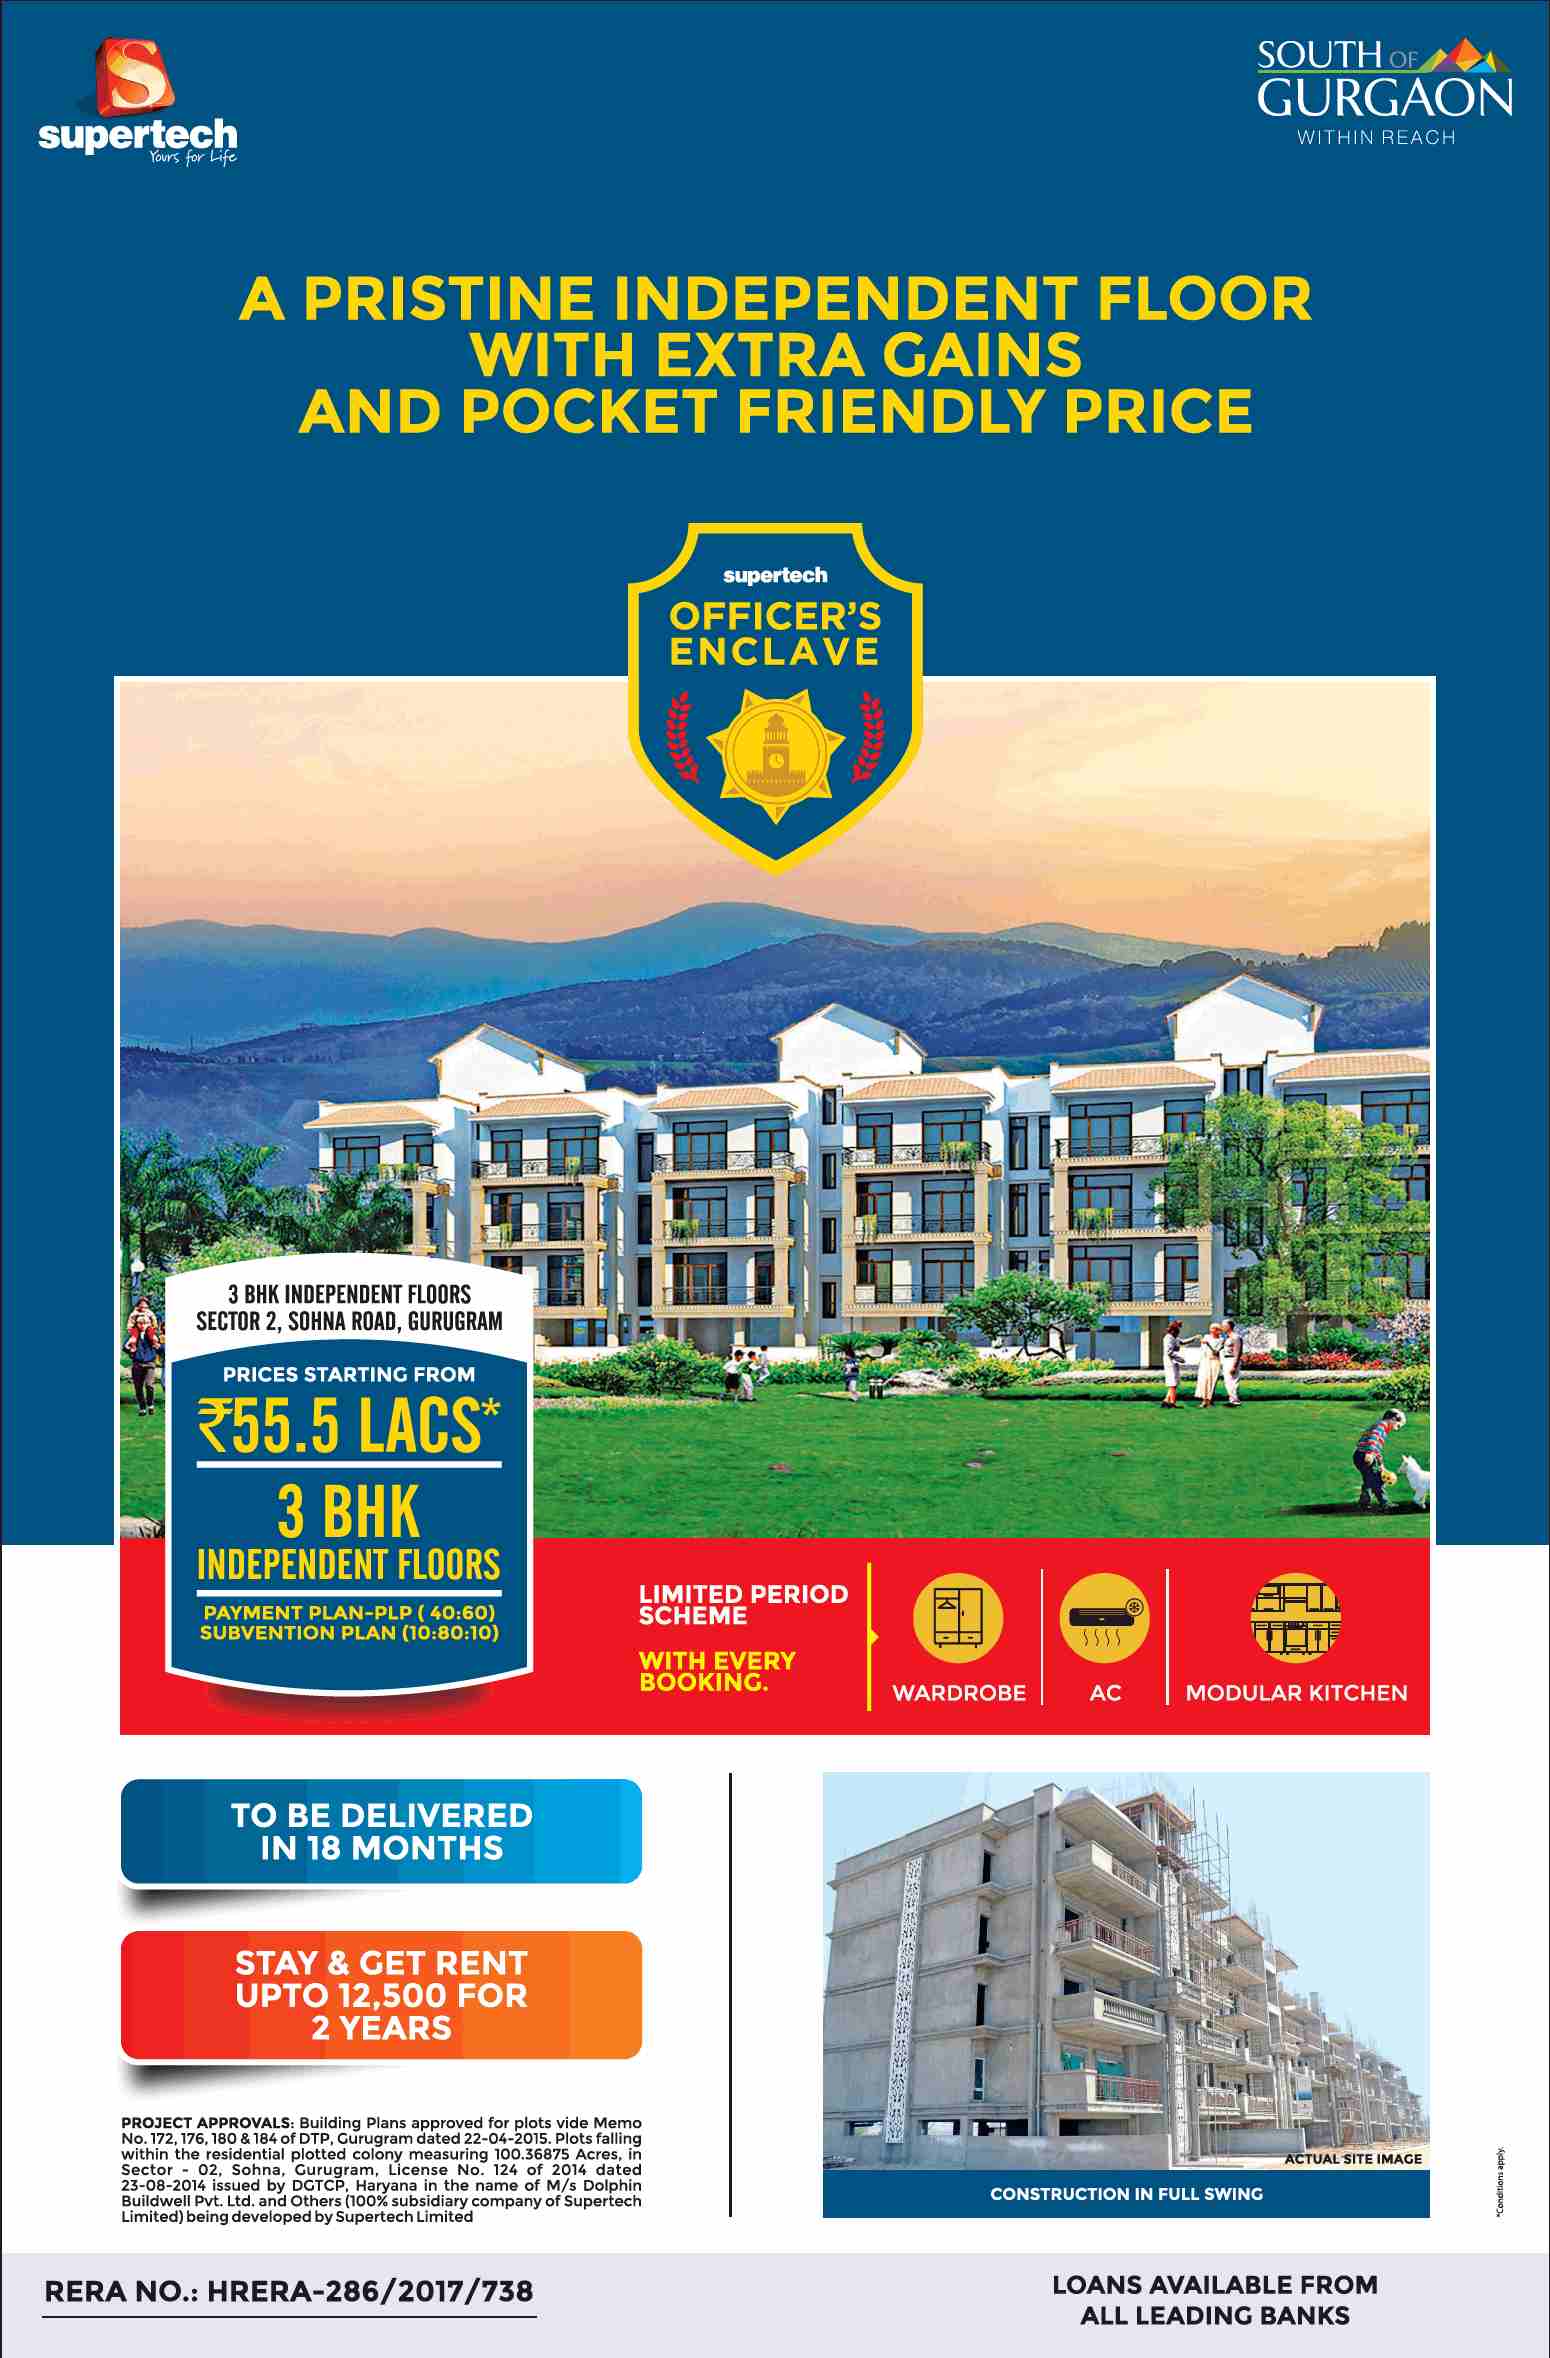 Get 3 BHK Independent floors in Rs 55 Lacs* at Supertech Officers Enclave, Gurgaon Update